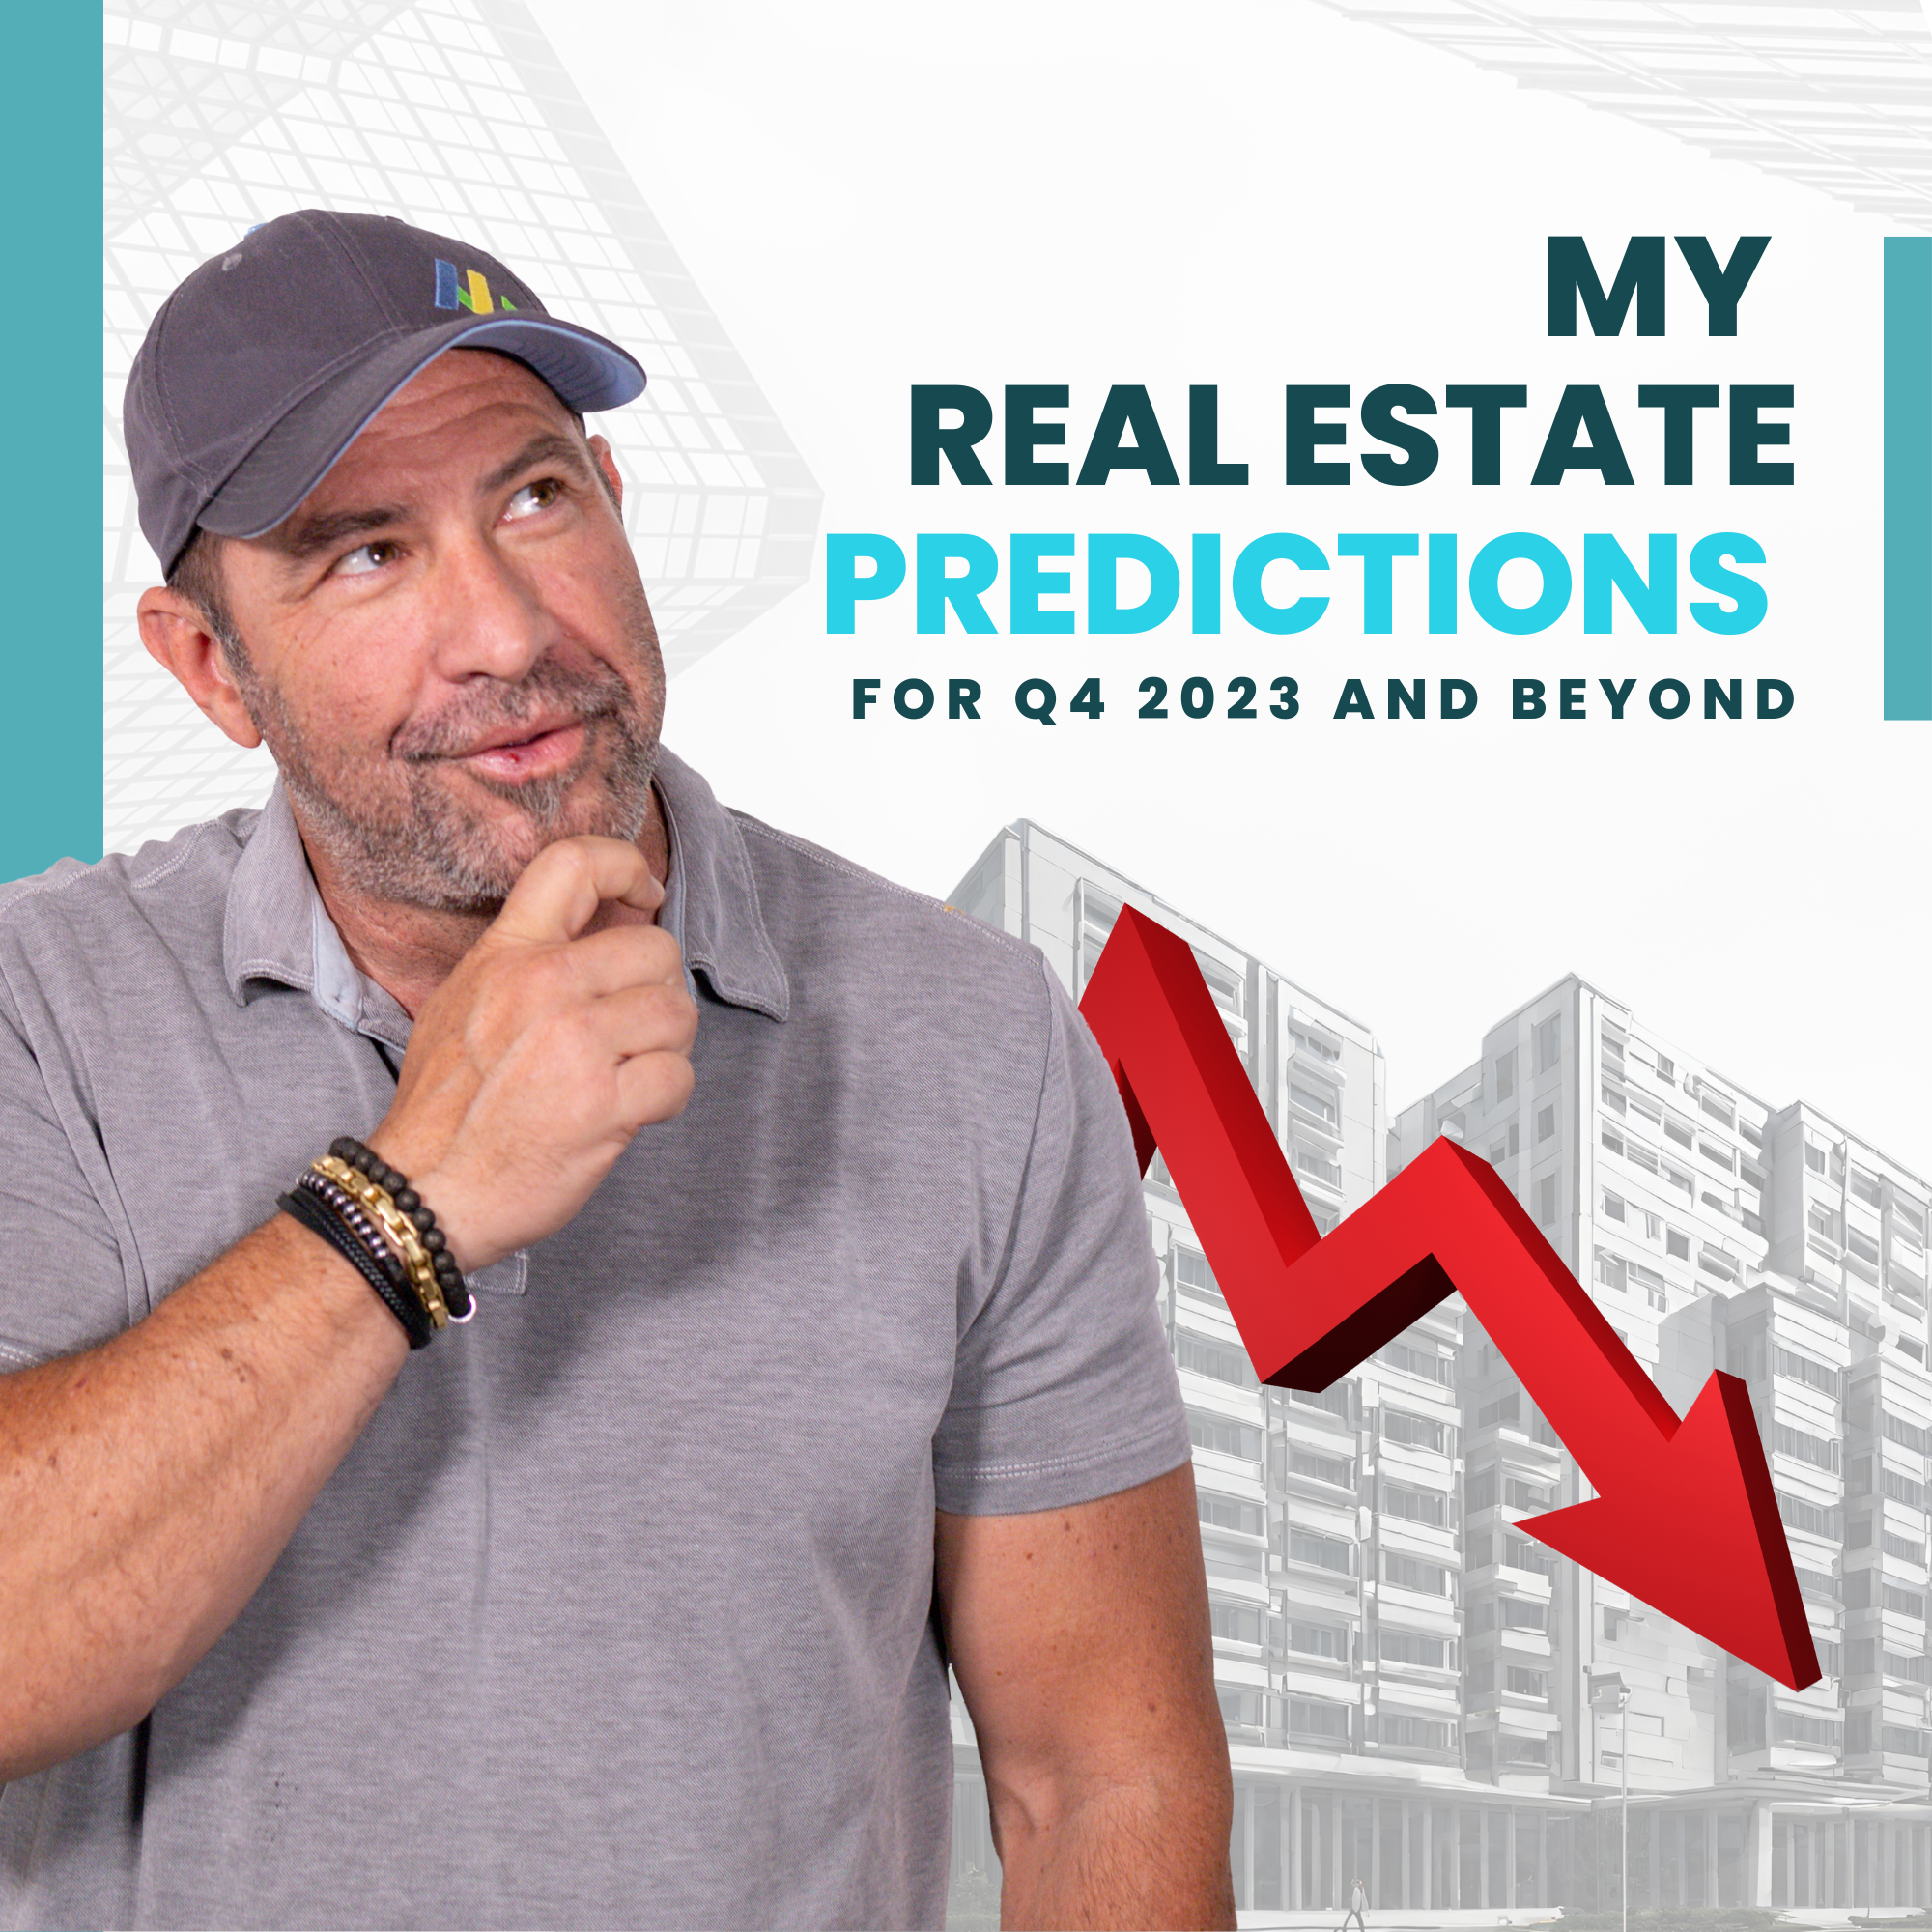 My Real Estate Predictions for Q4 2023 and Beyond